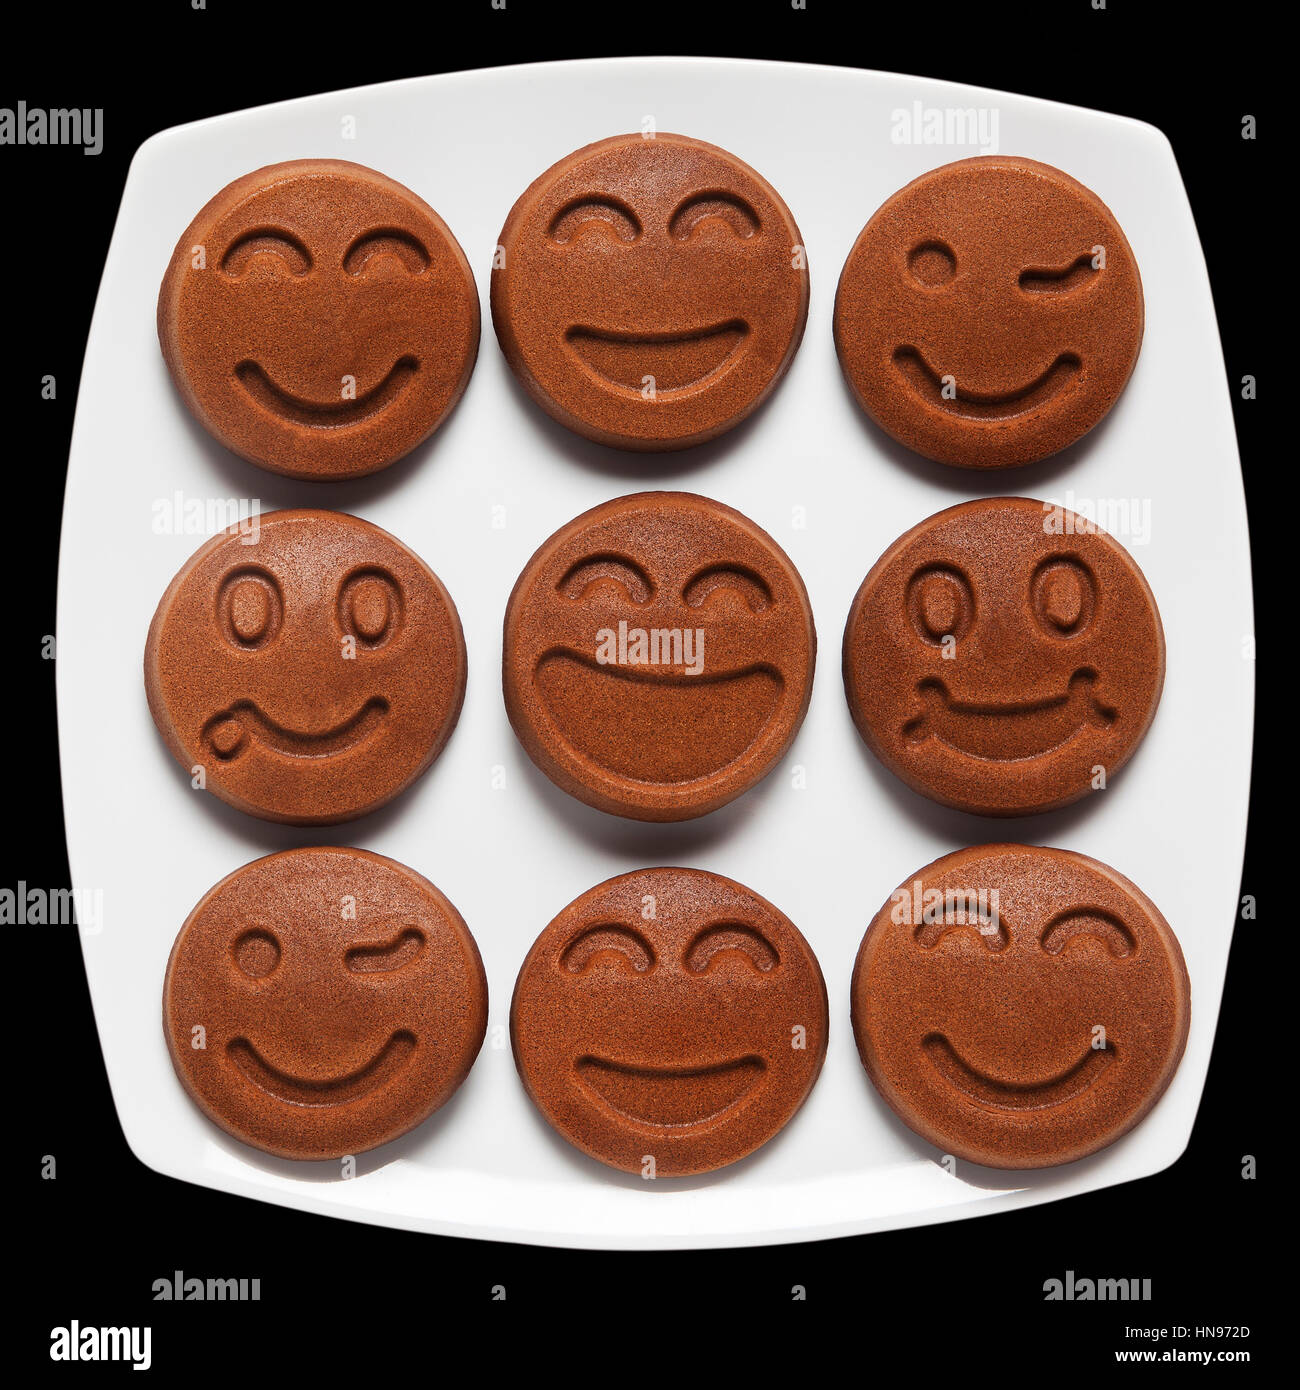 Happy Food. Smiling chocolate Pancakes. Concept of Funny Breakfast. Stock Photo